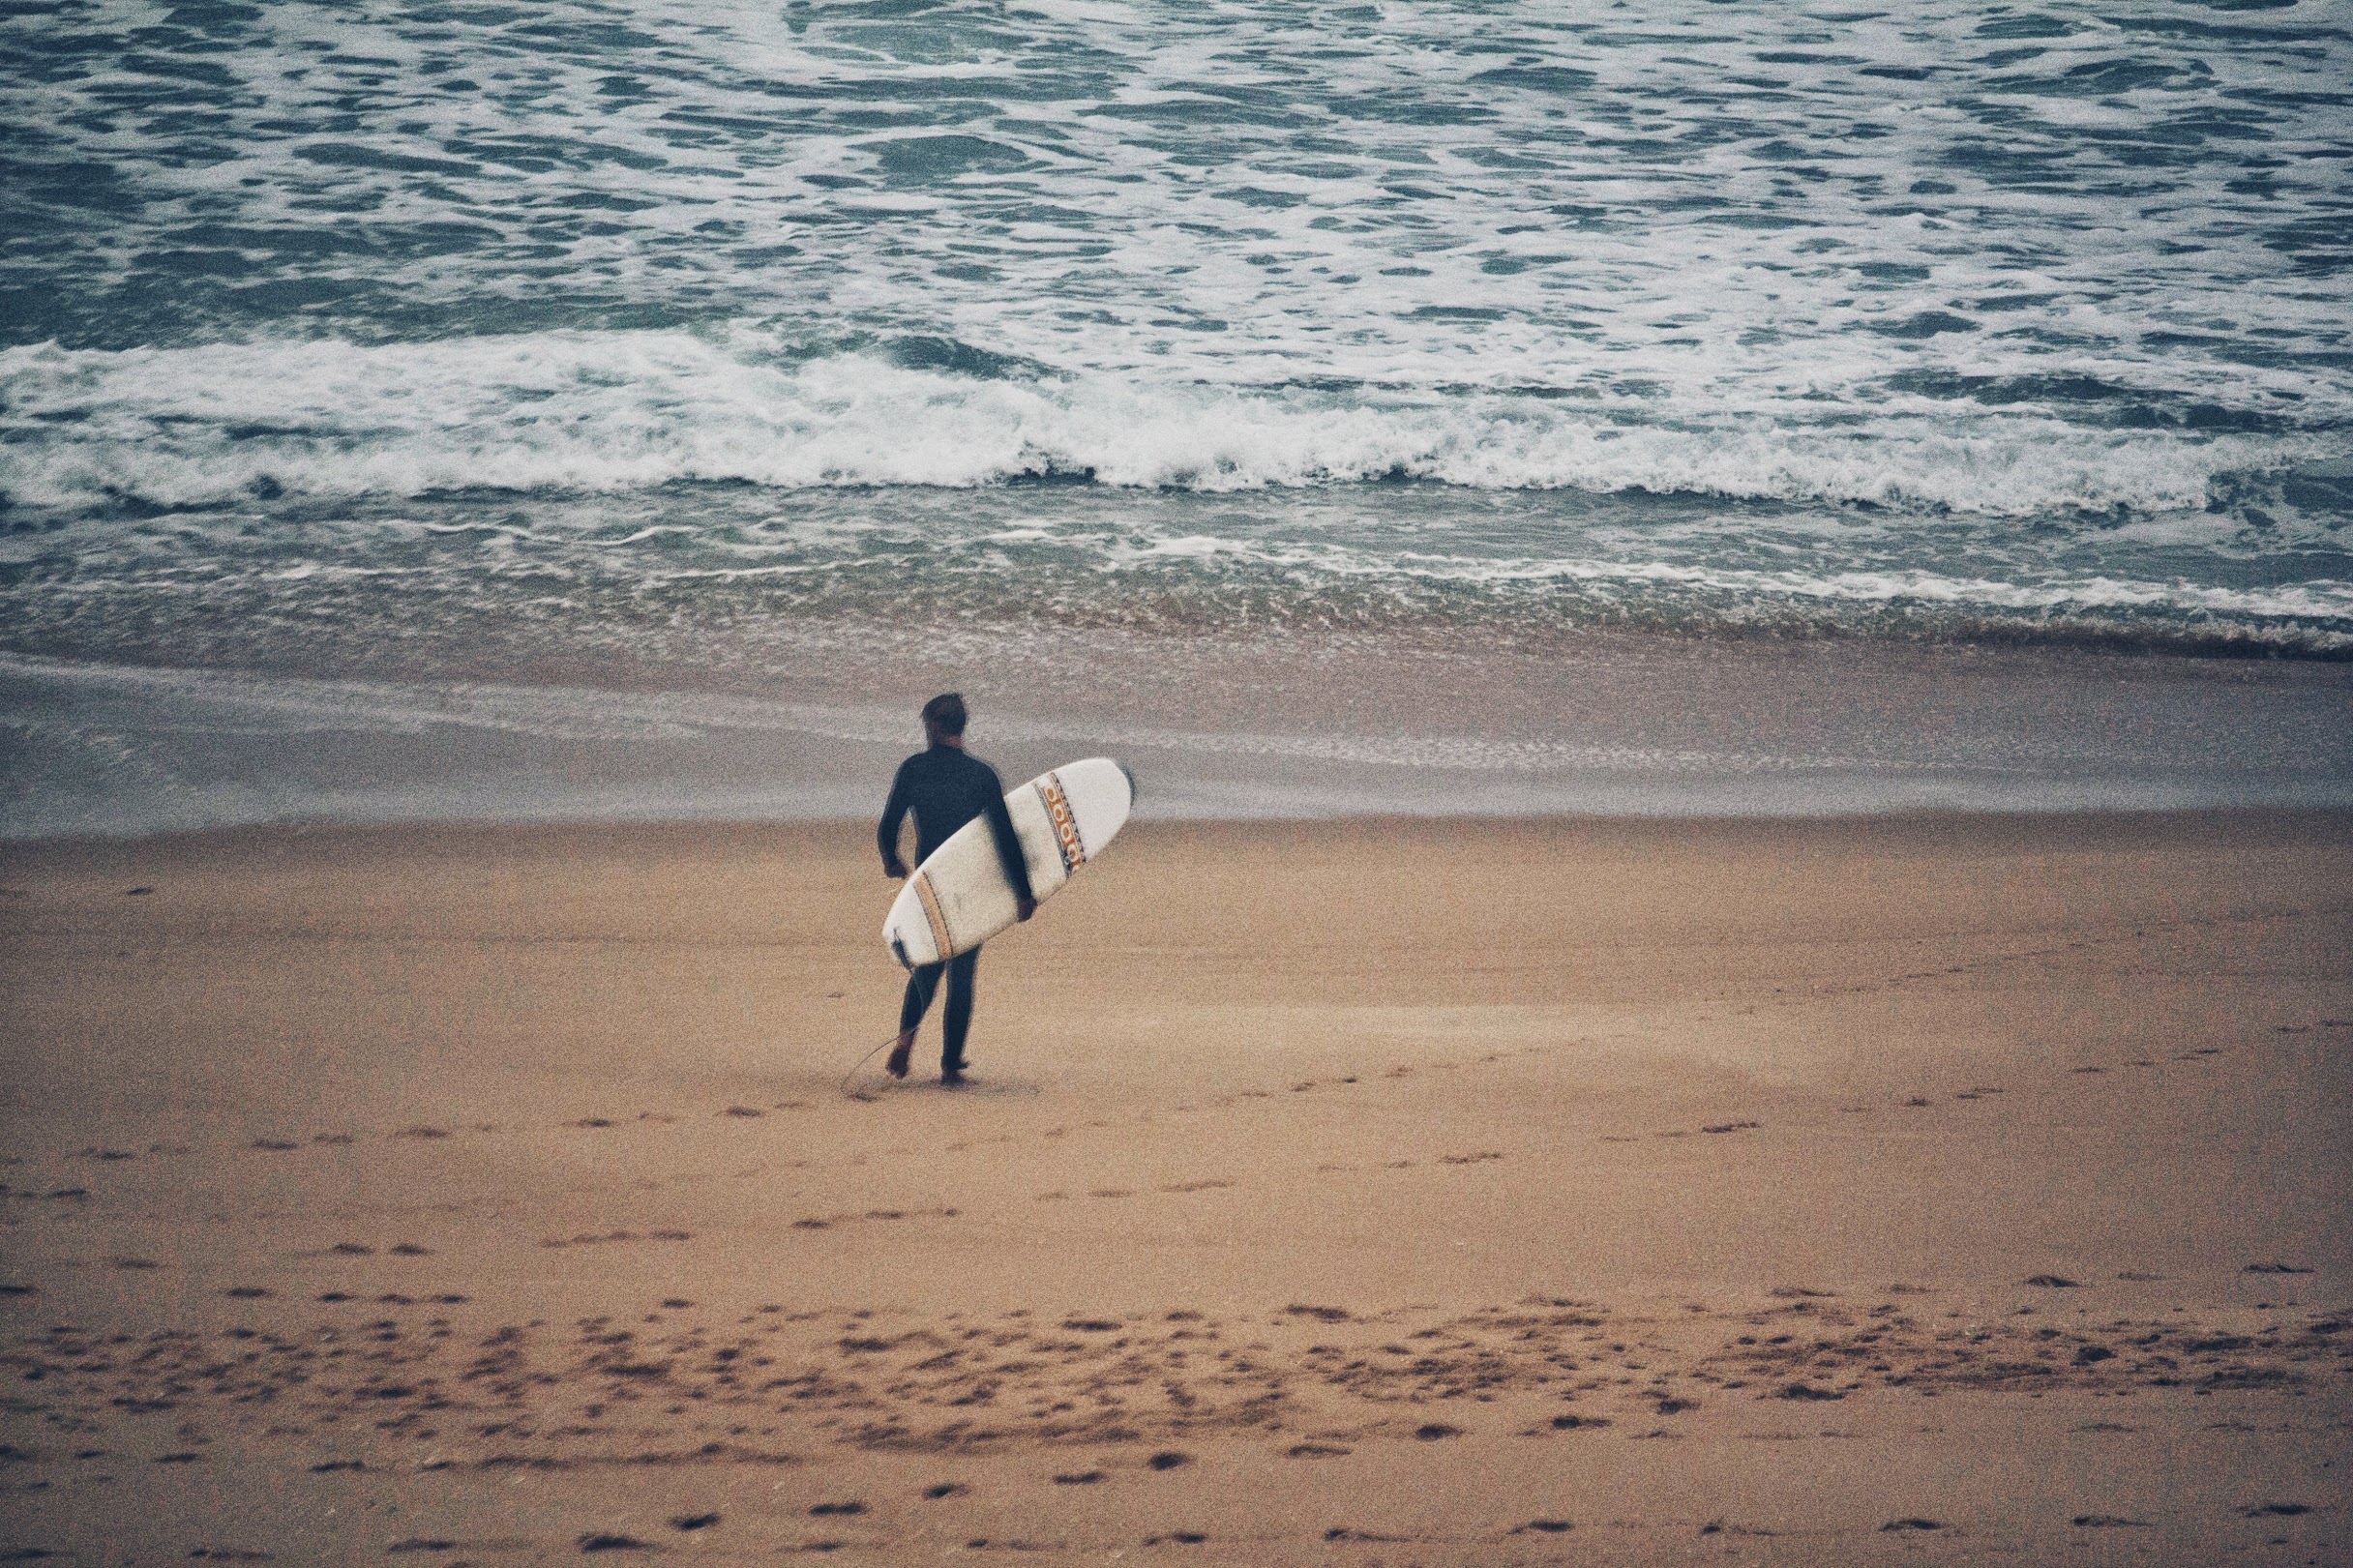 A surfer approaches the water at Afife beach, Northern Portugal.